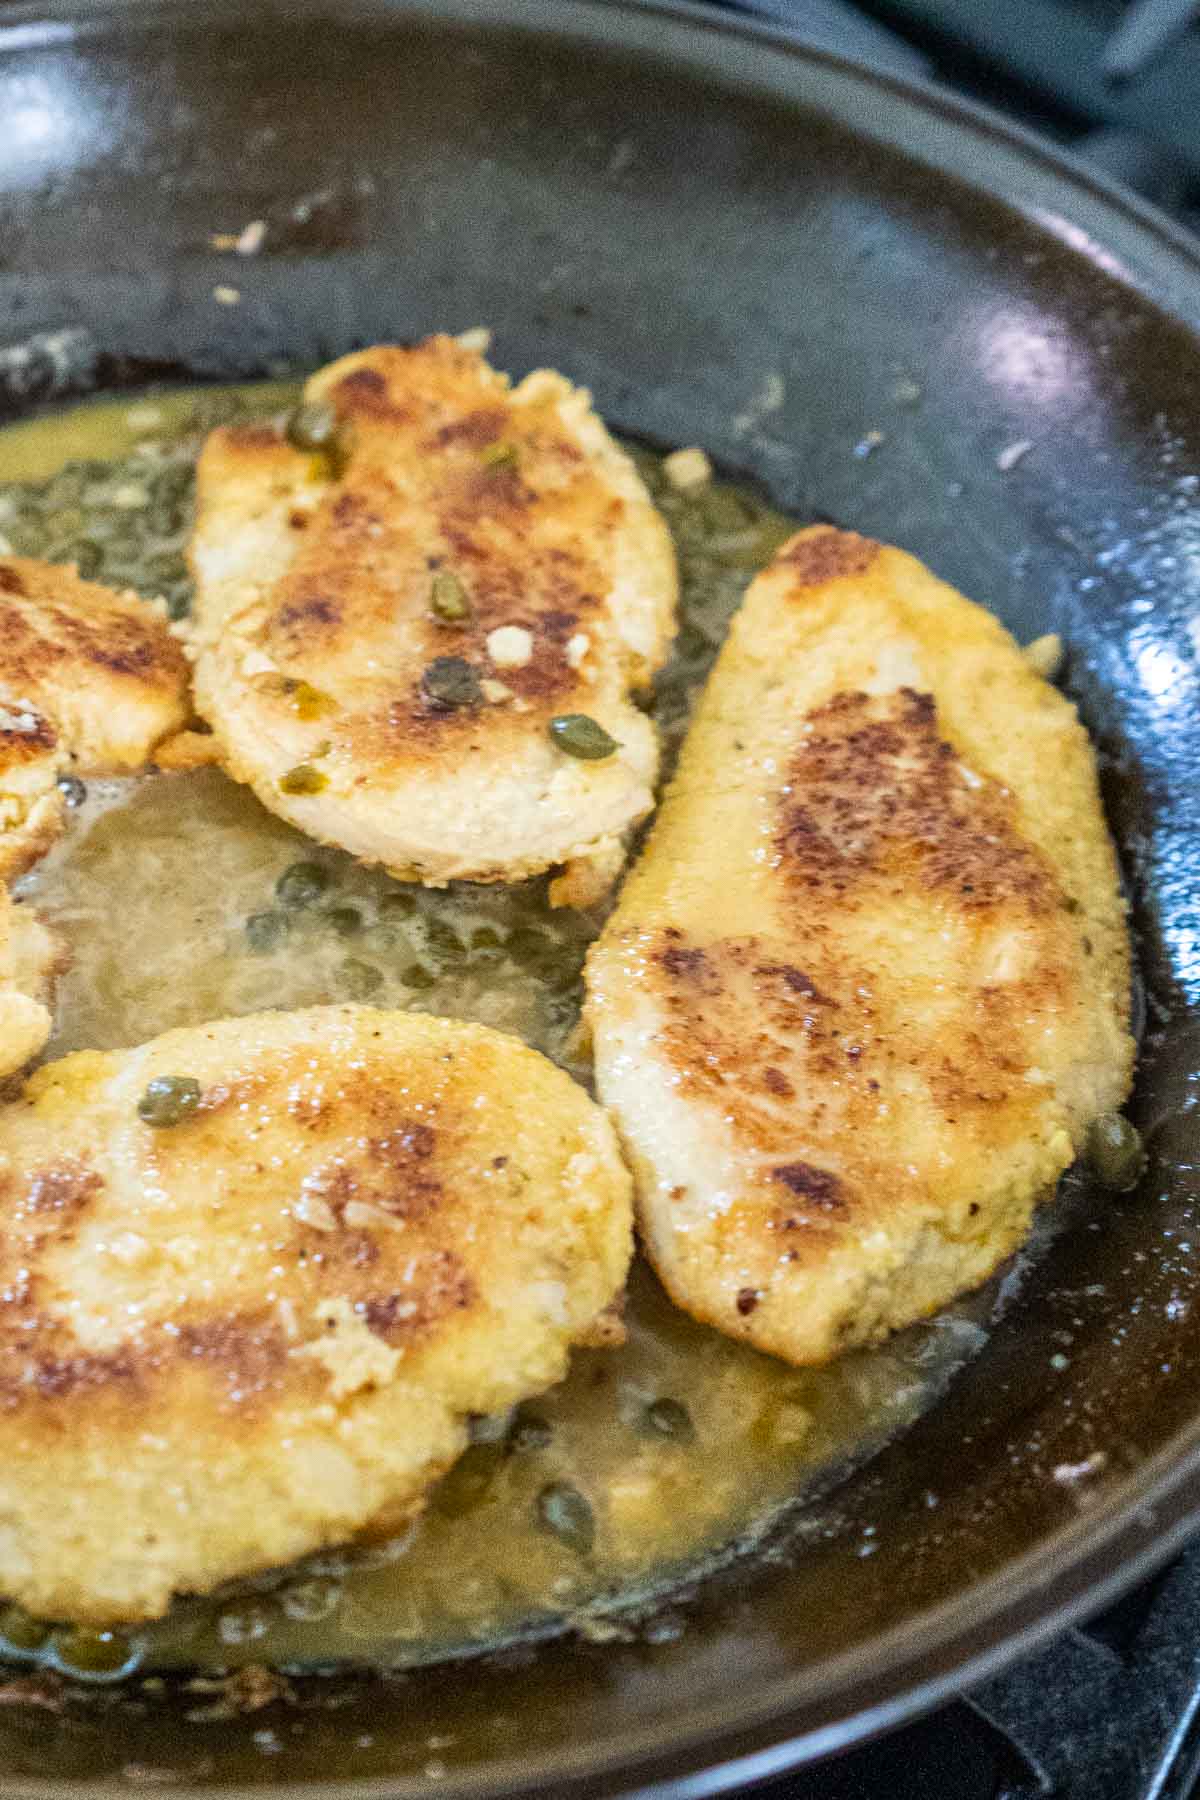 Cooking chicken in piccata sauce.